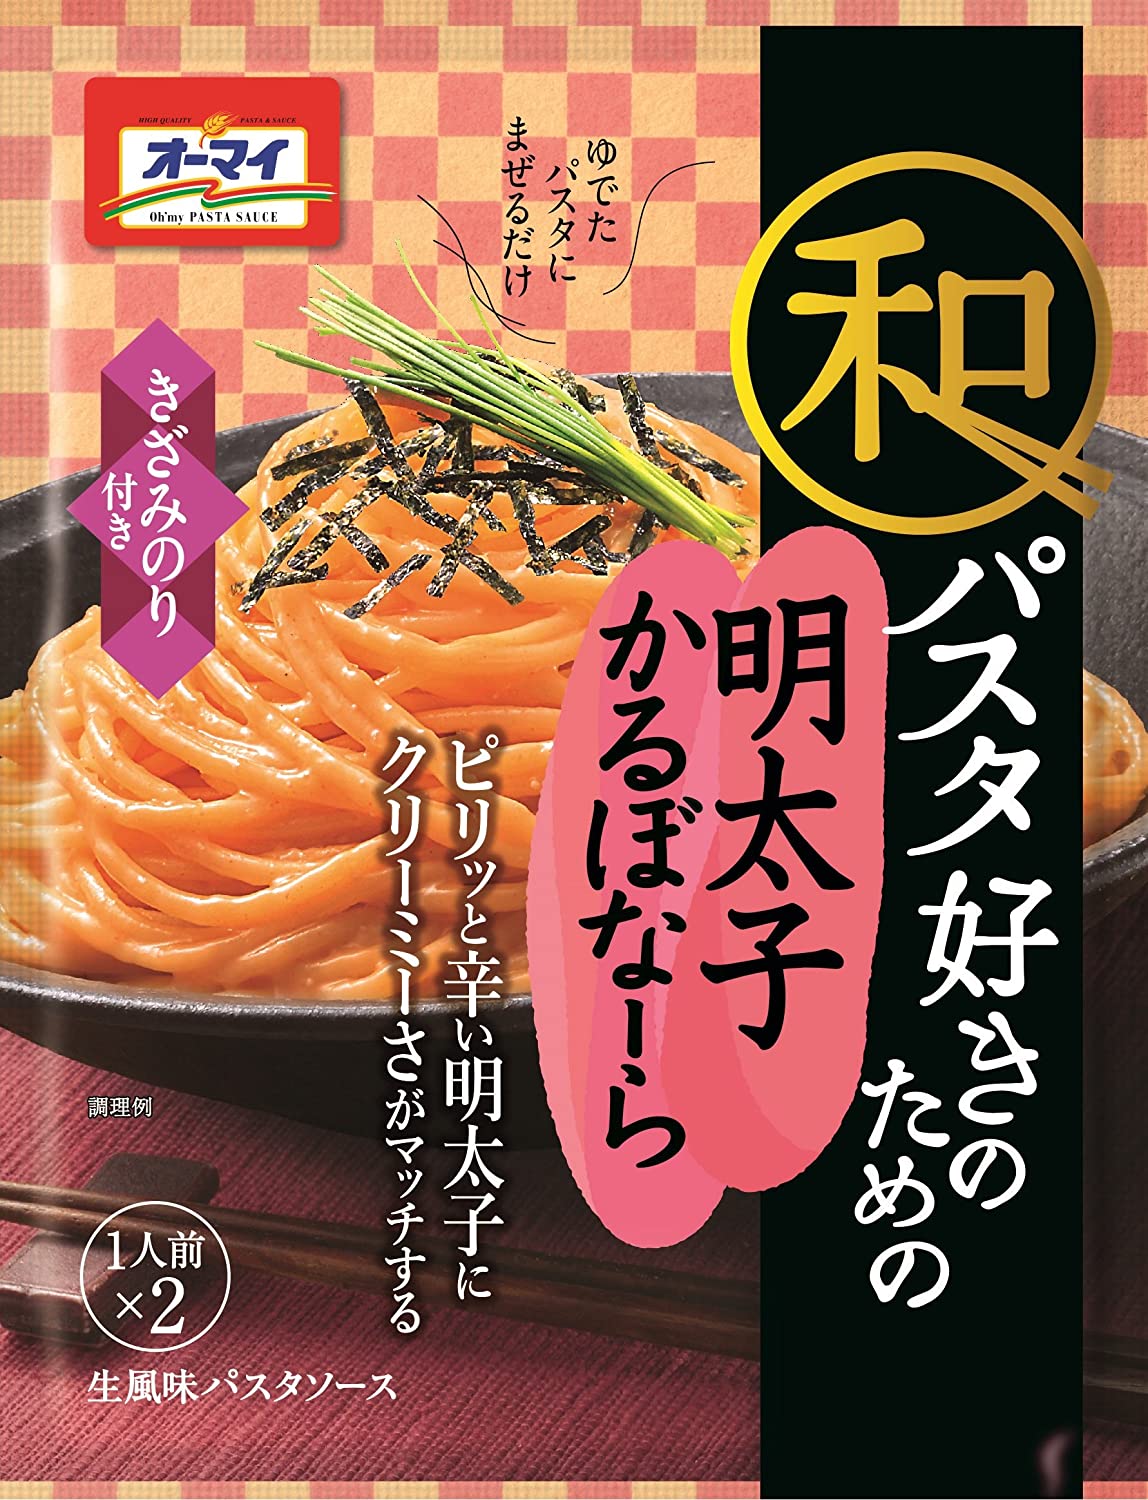 Ohmy mentaiko-cream sauce 2portions